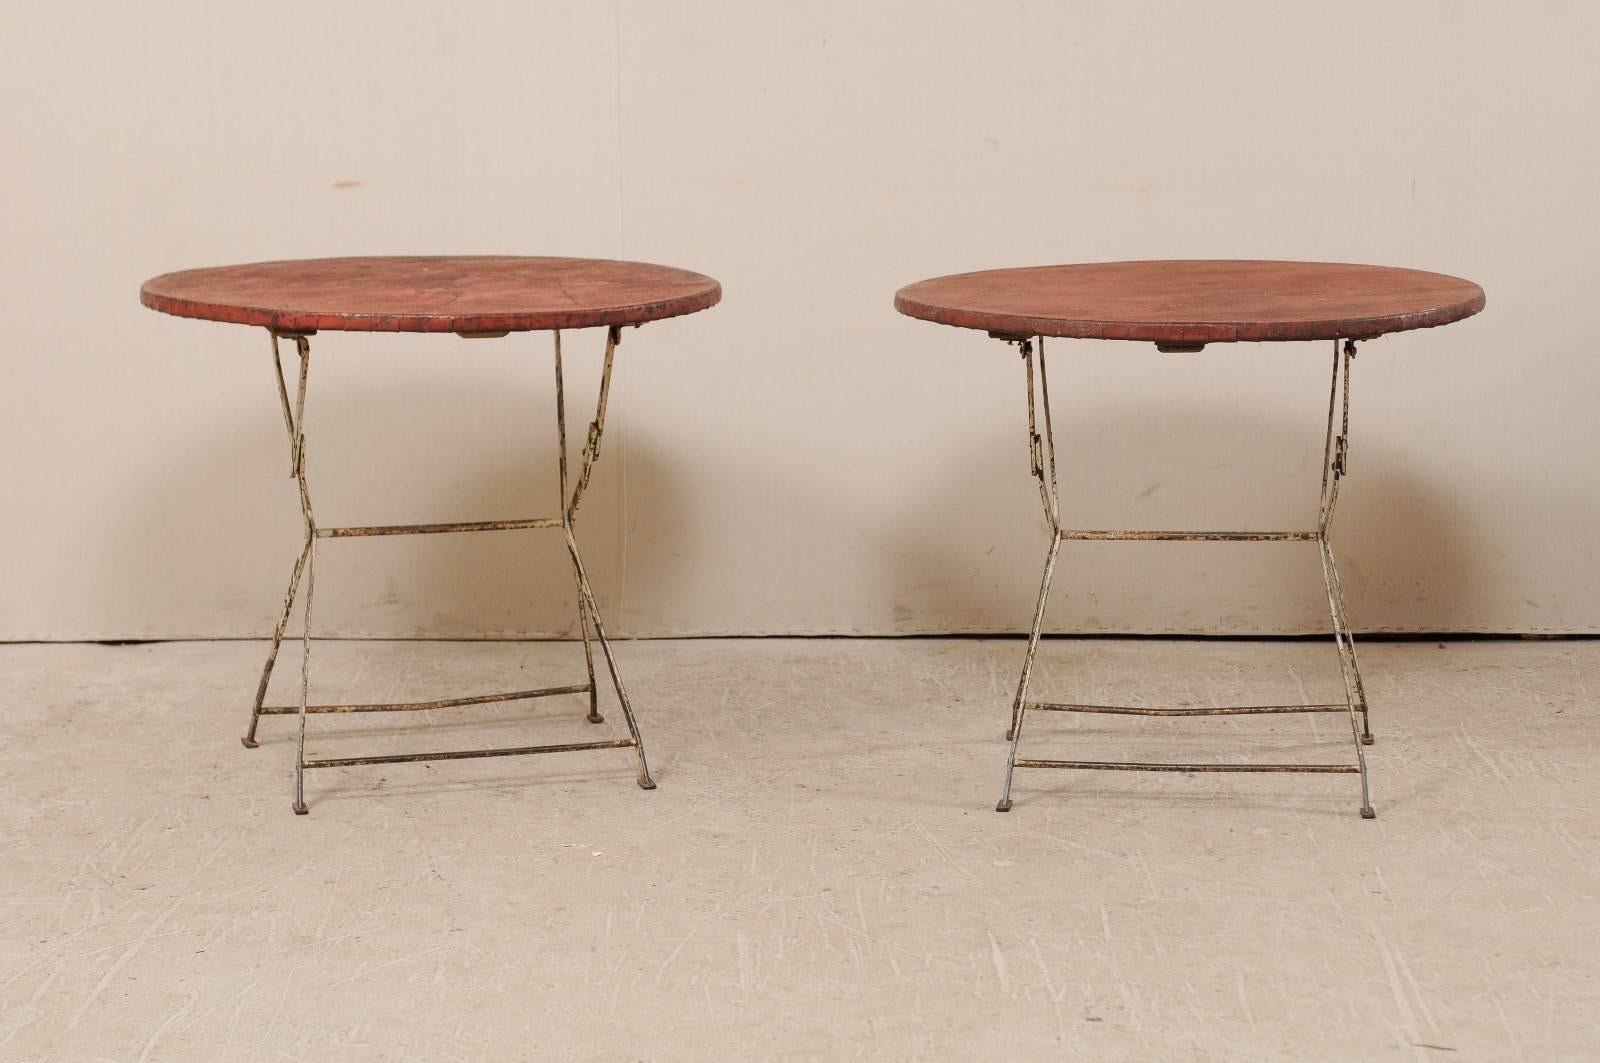 A pair of vintage French bistrot or café tables. This pair of round French tables feature folding tops that collapse and flatten the table for easy storage. These tables have their original red painted tops and white legs, with a lot of nice aged